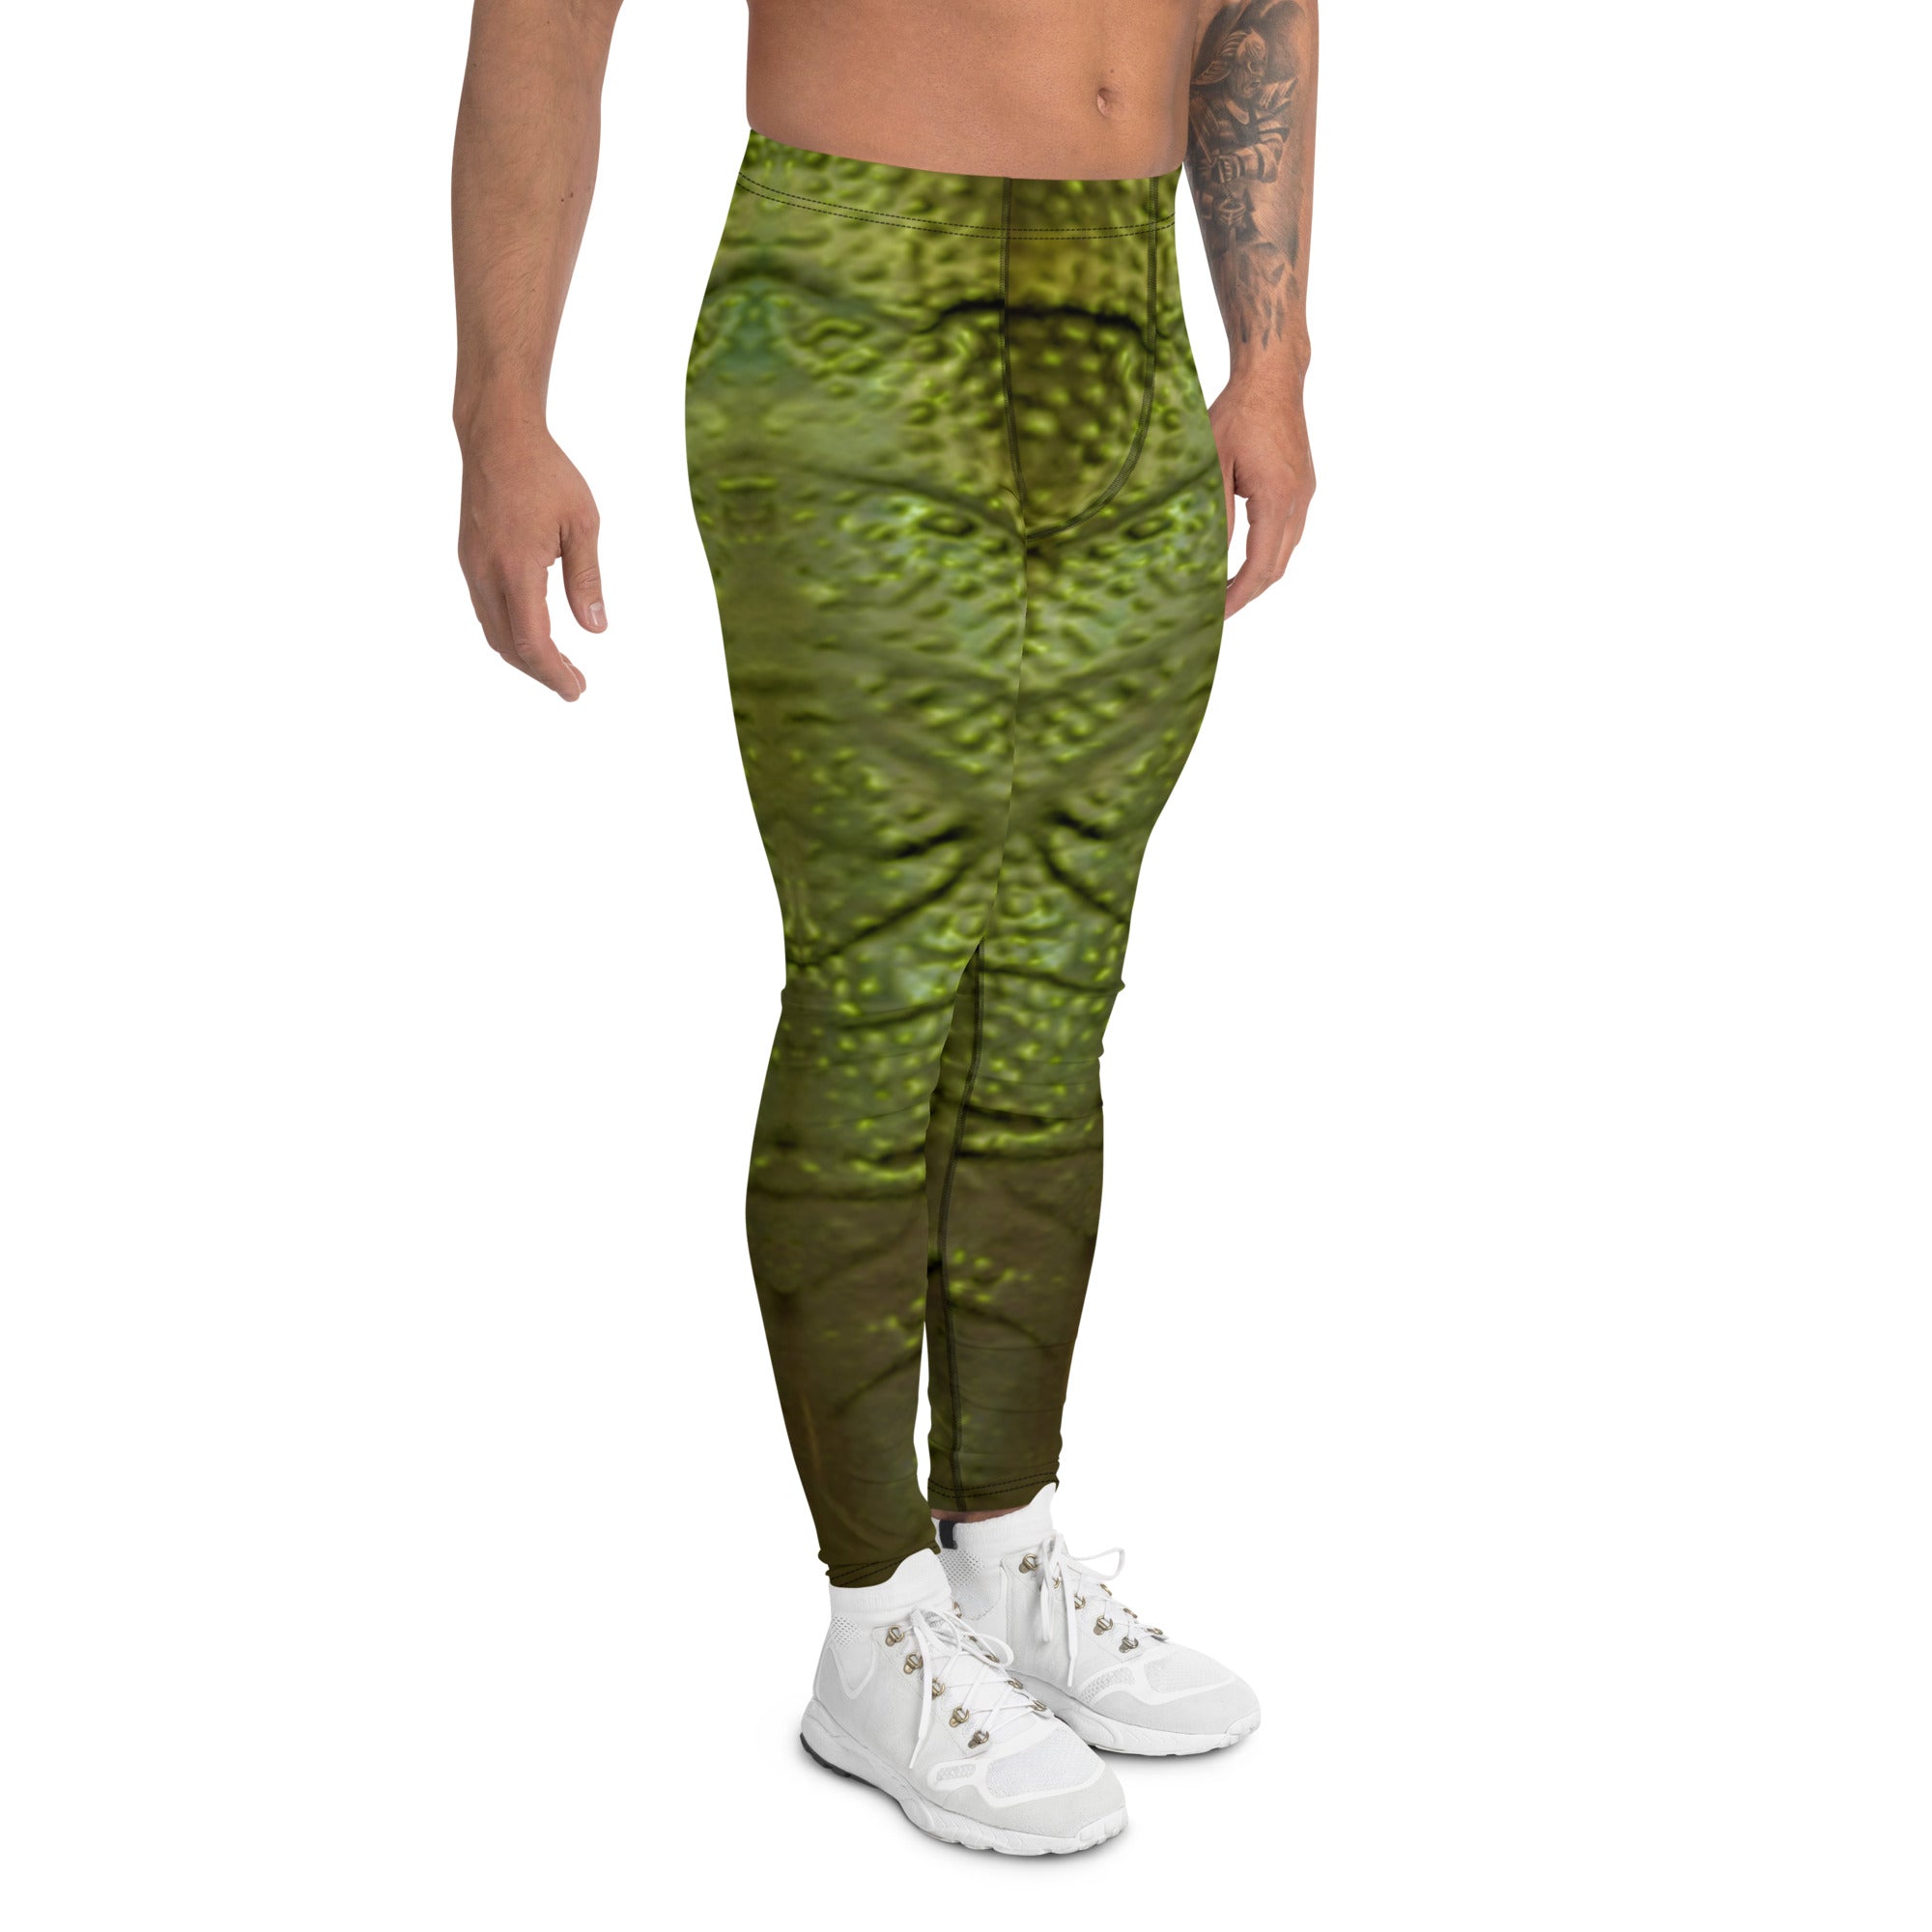 Creature From the Black Lagoon Inspired Leggings 